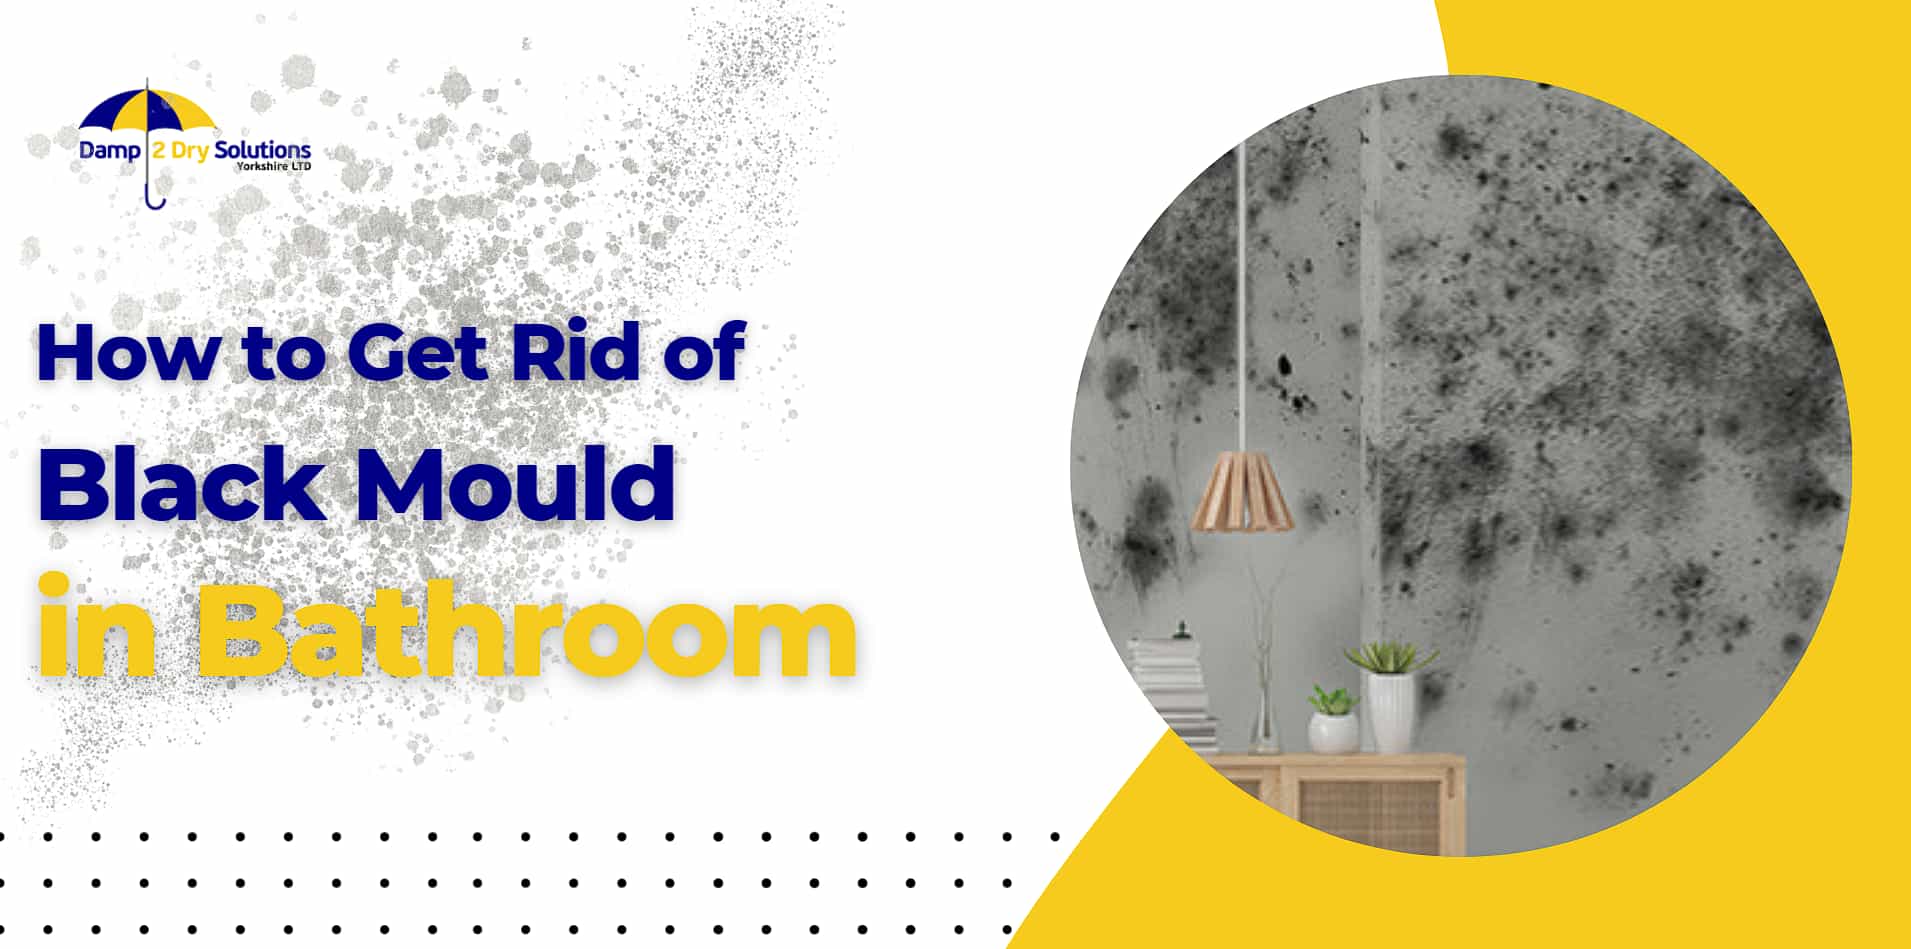 How to Get Rid of Black Mold in Bathrooms